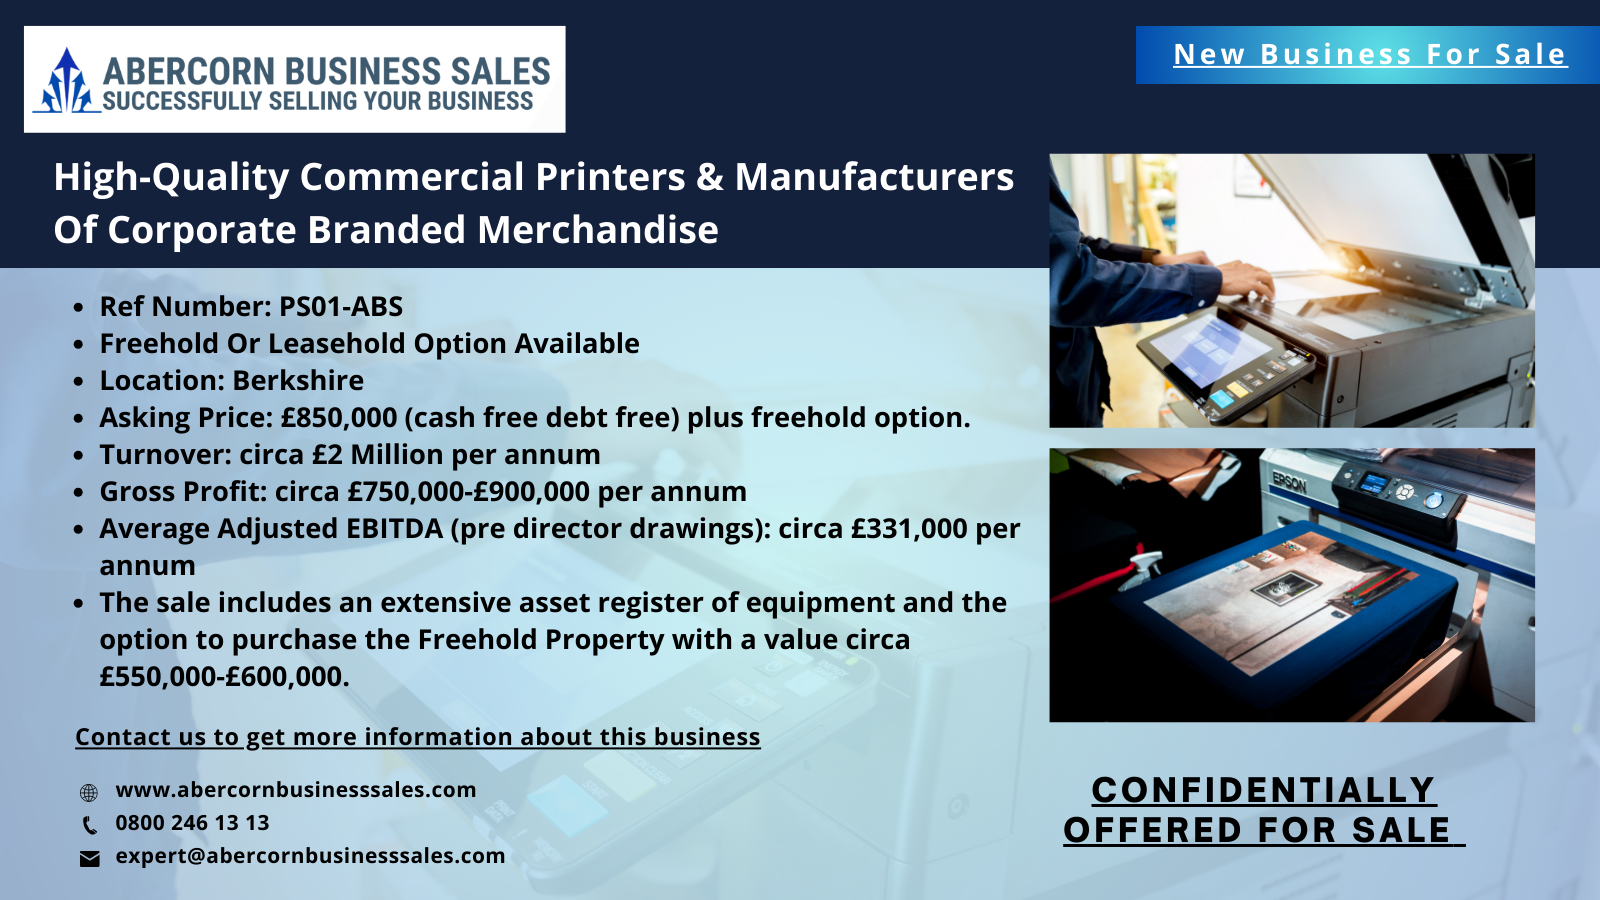 PS01-ABS - High-Quality Commercial Printers & Manufacturers Of Corporate Branded Merchandise - Freehold Or Leasehold Option Available